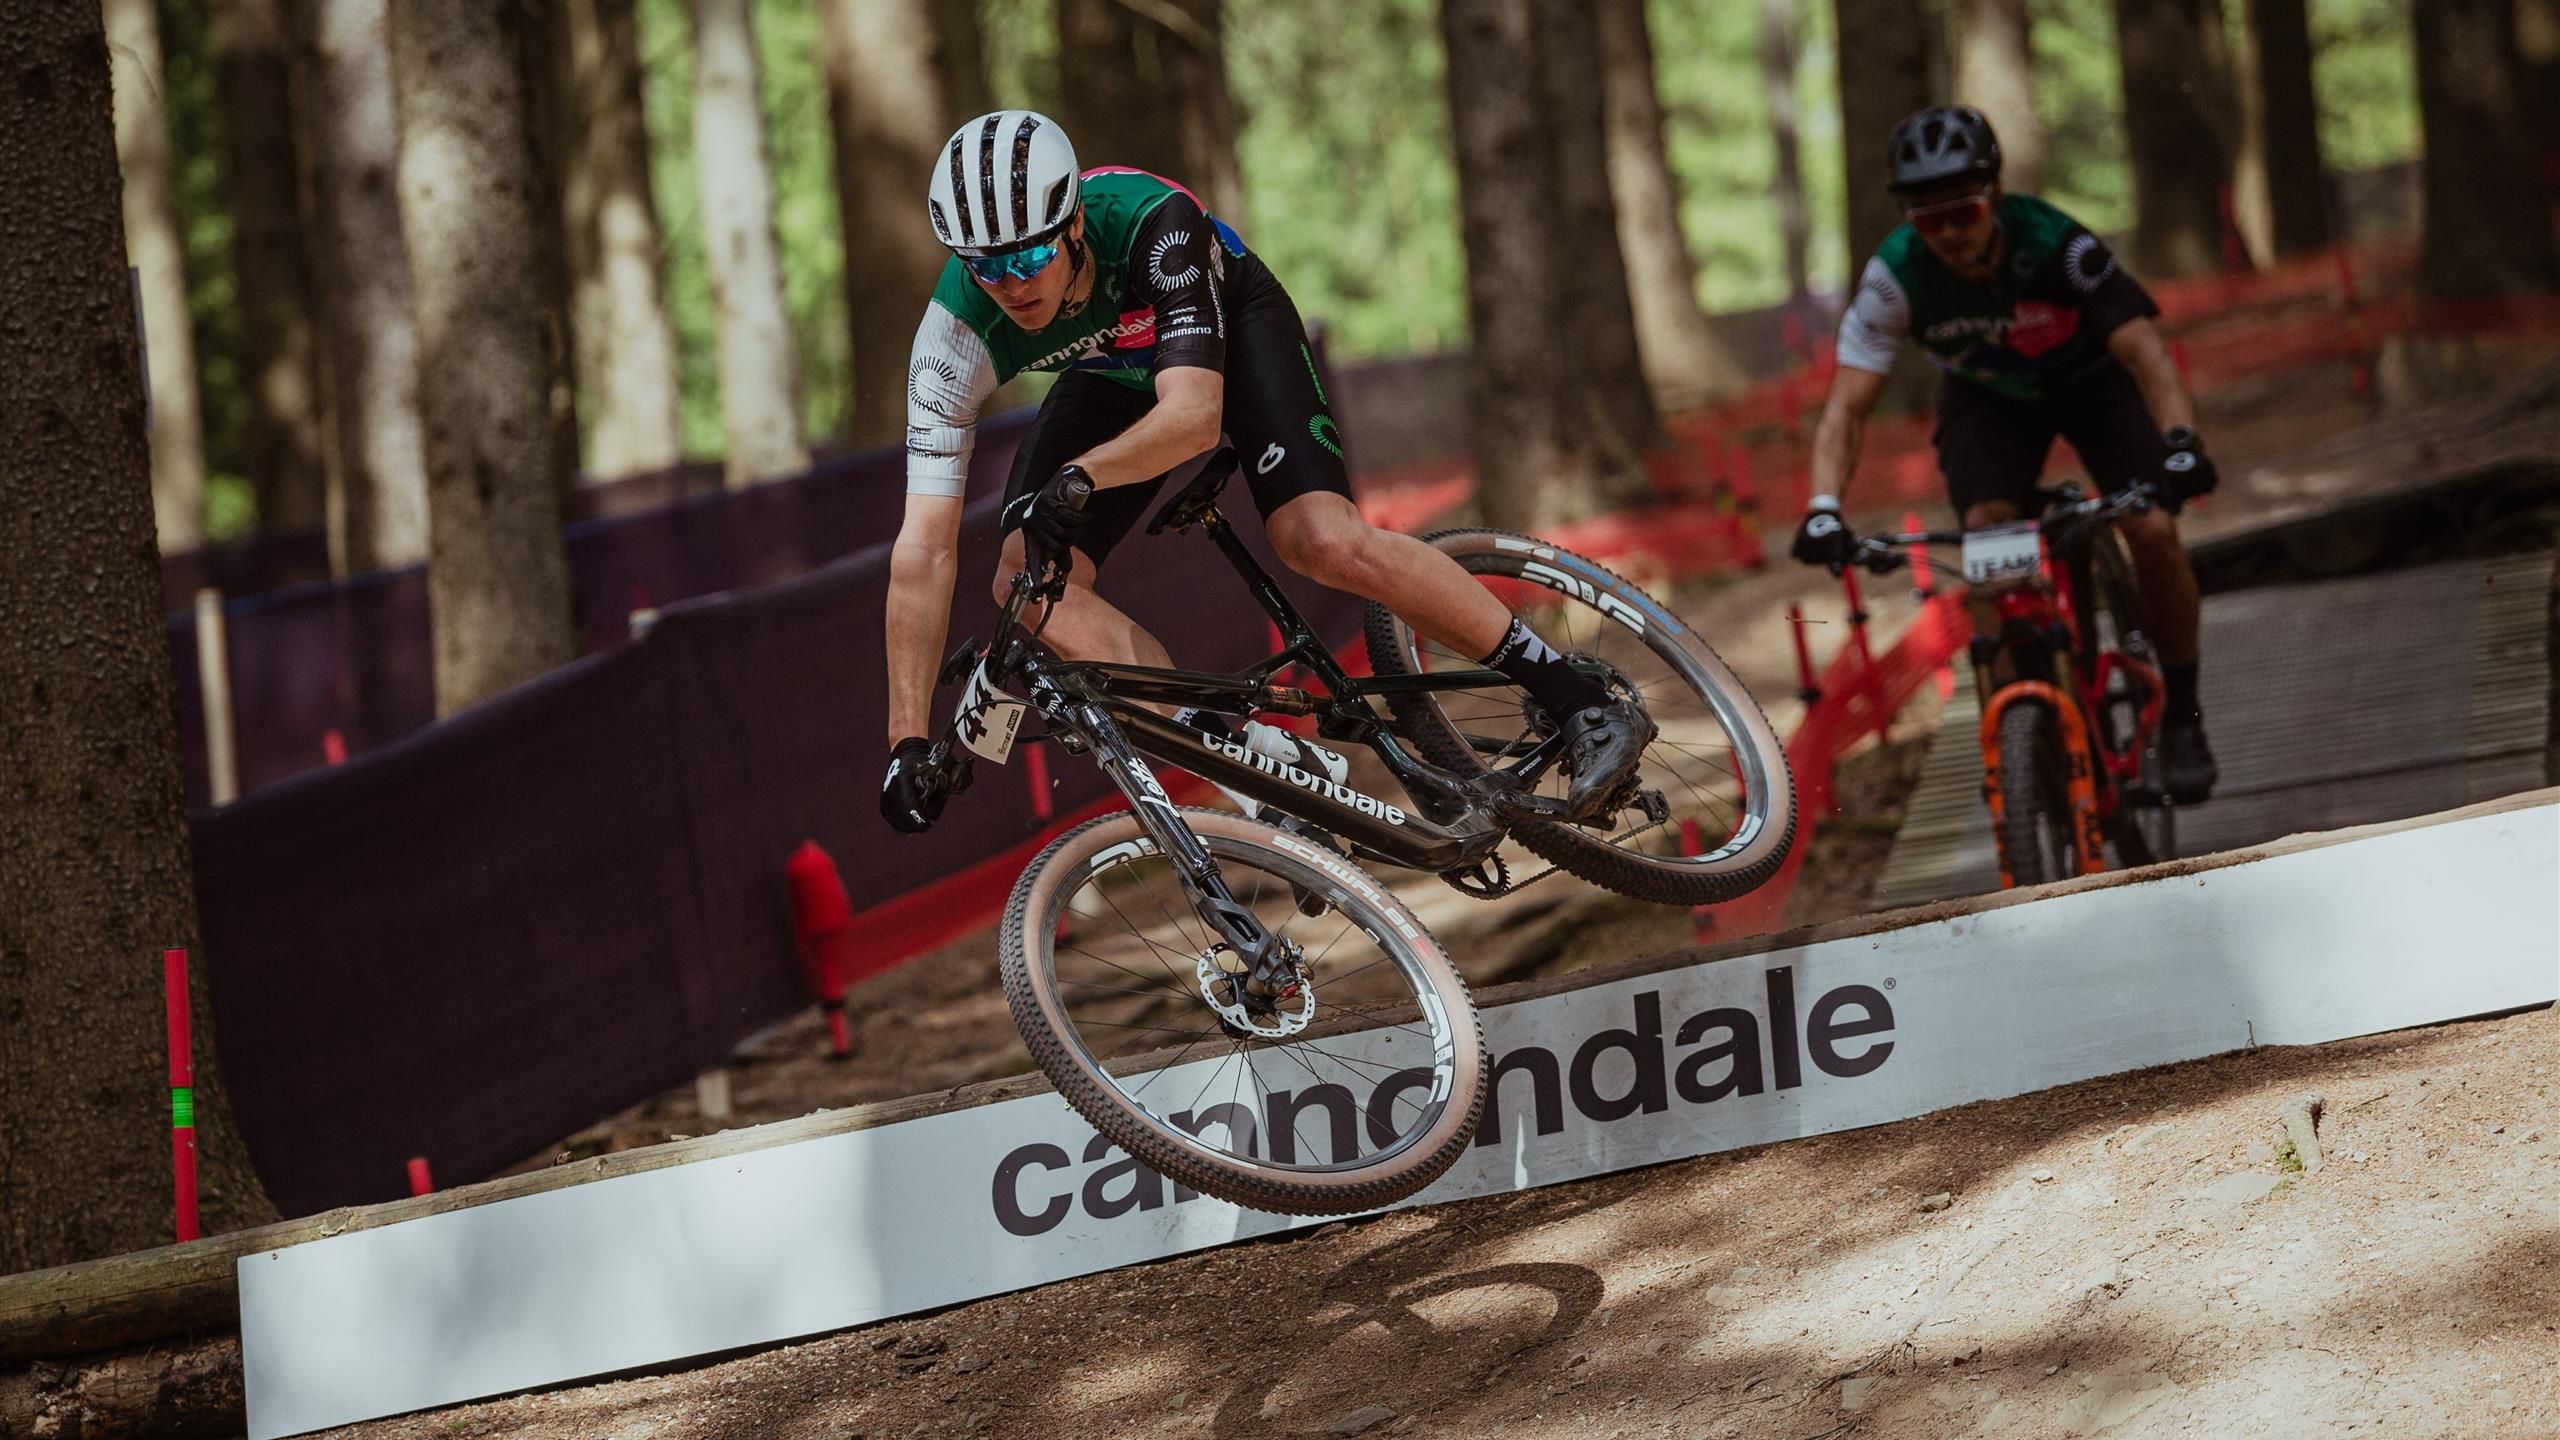 UCI Mountain Bike World Series How to watch, TV and live stream details, what is the schedule? Key dates